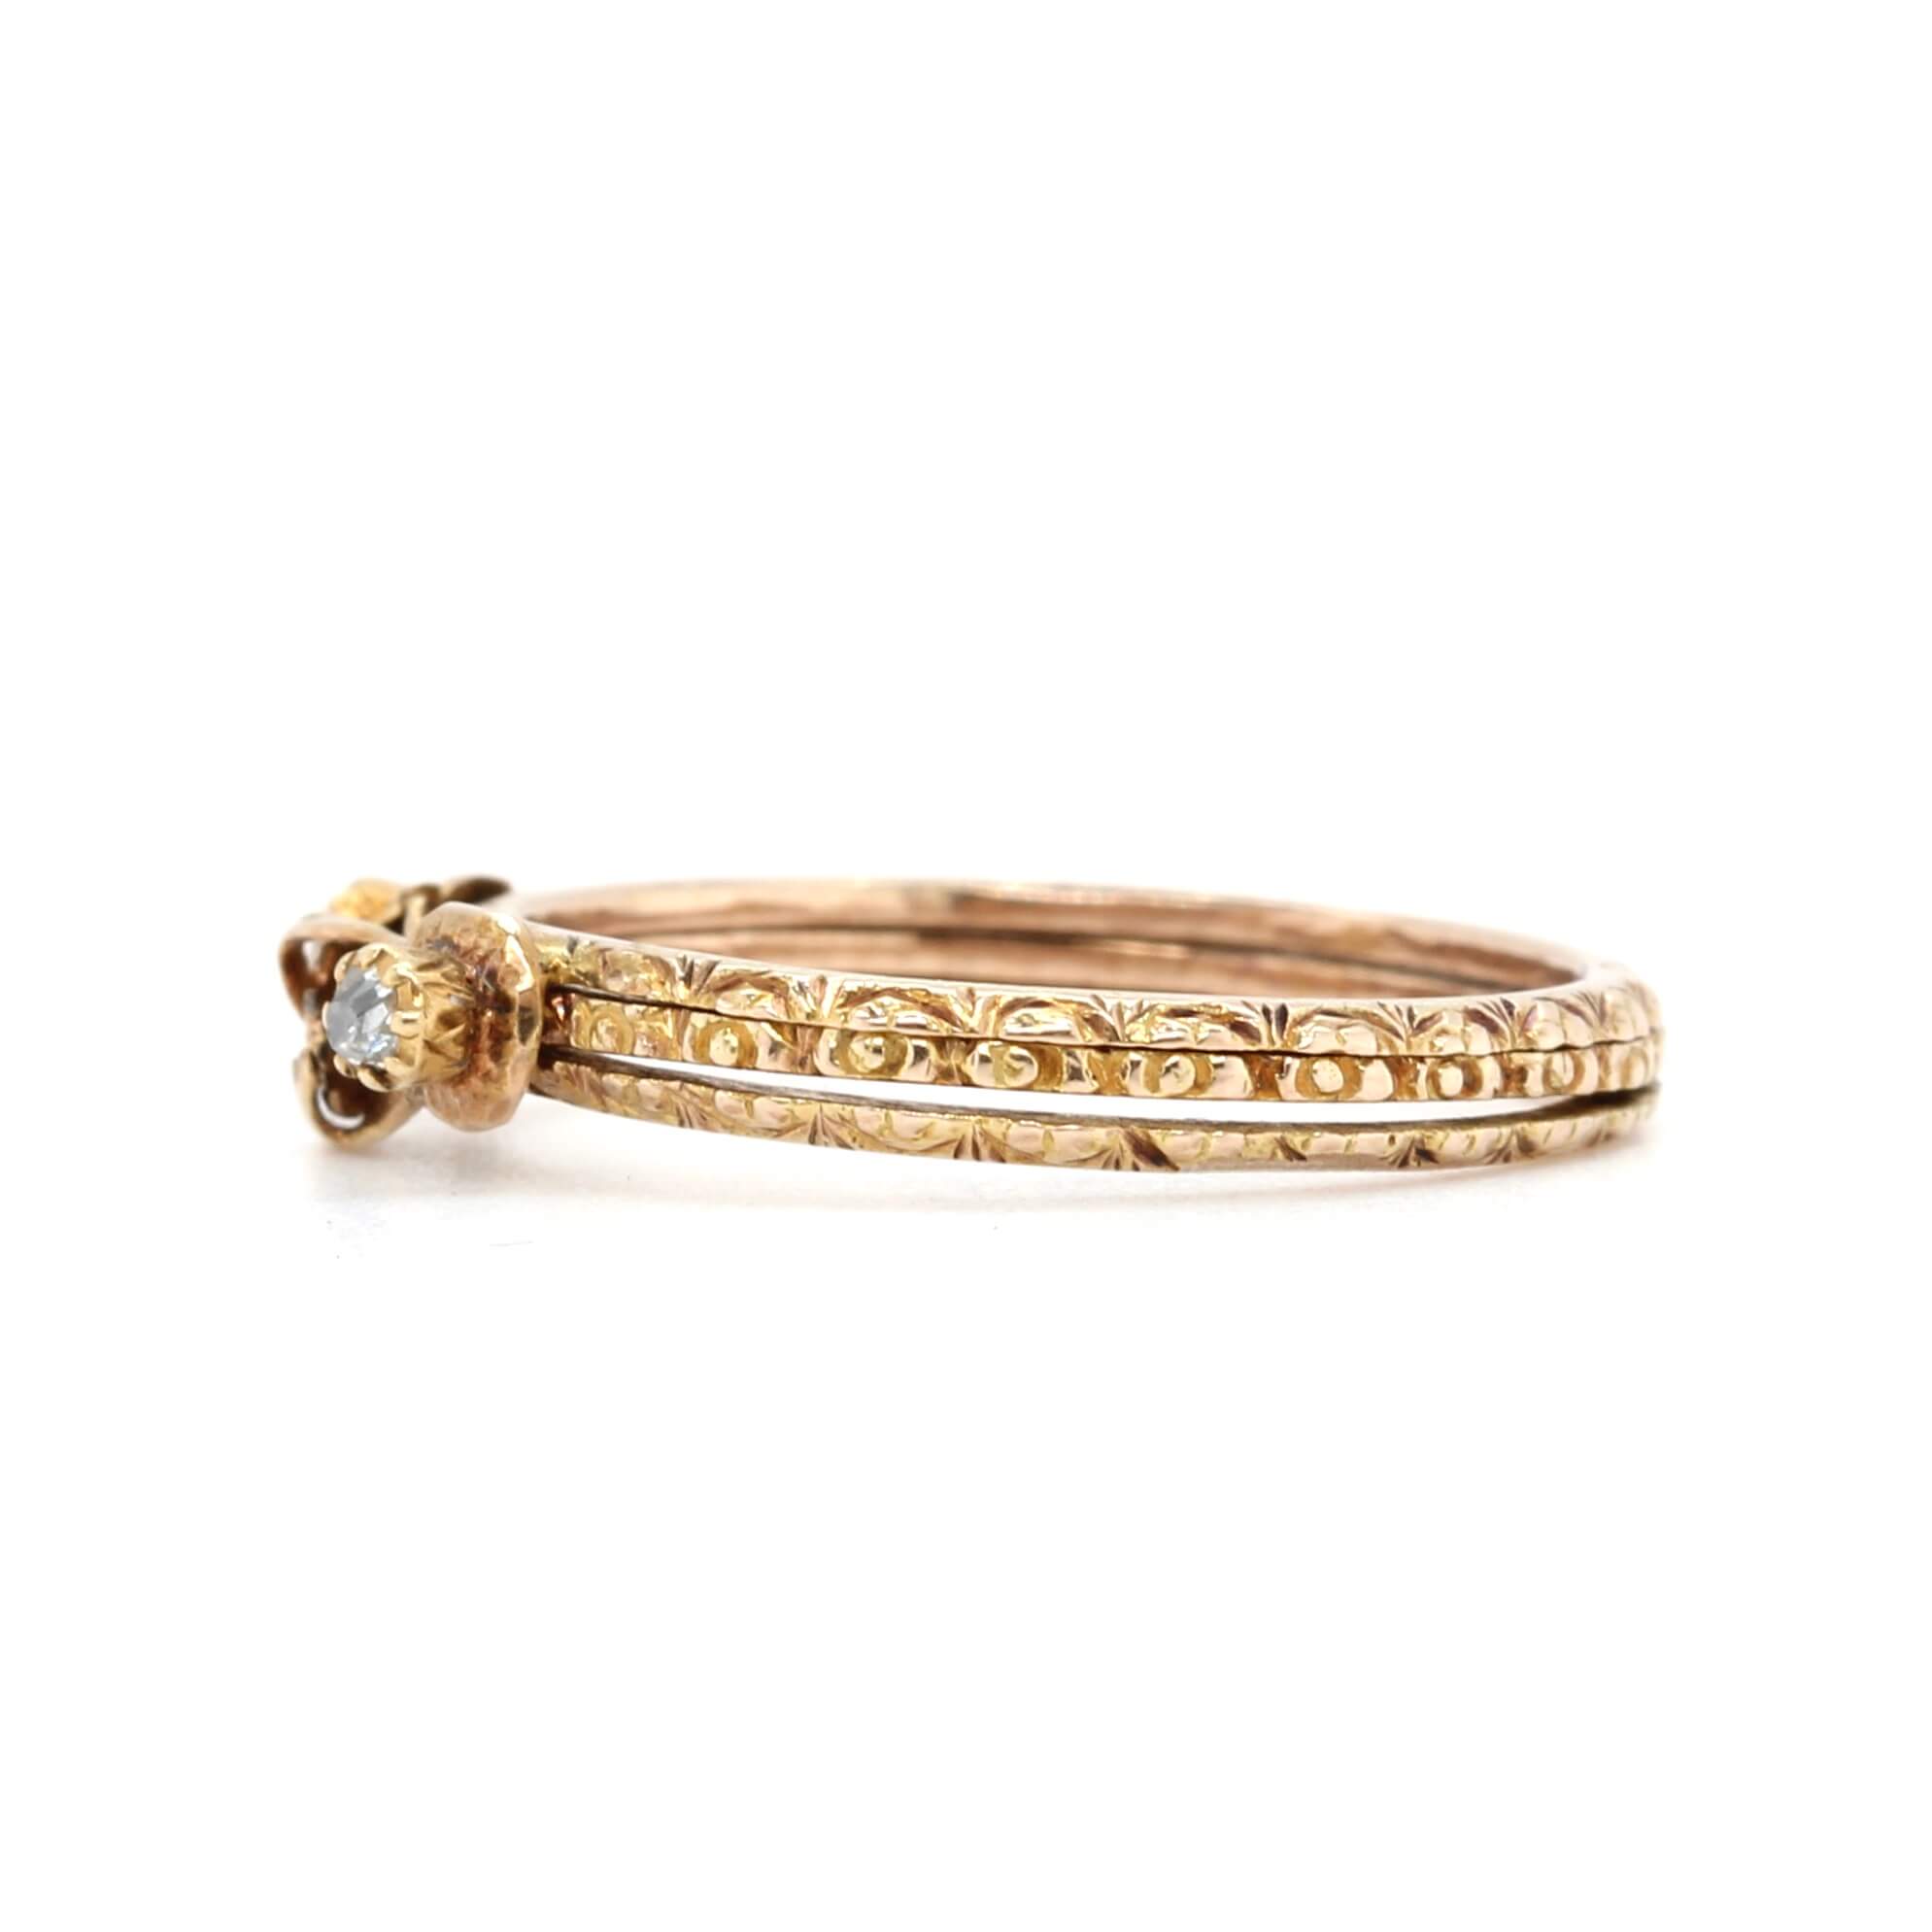 Victorian Gold and Diamond Fede Ring